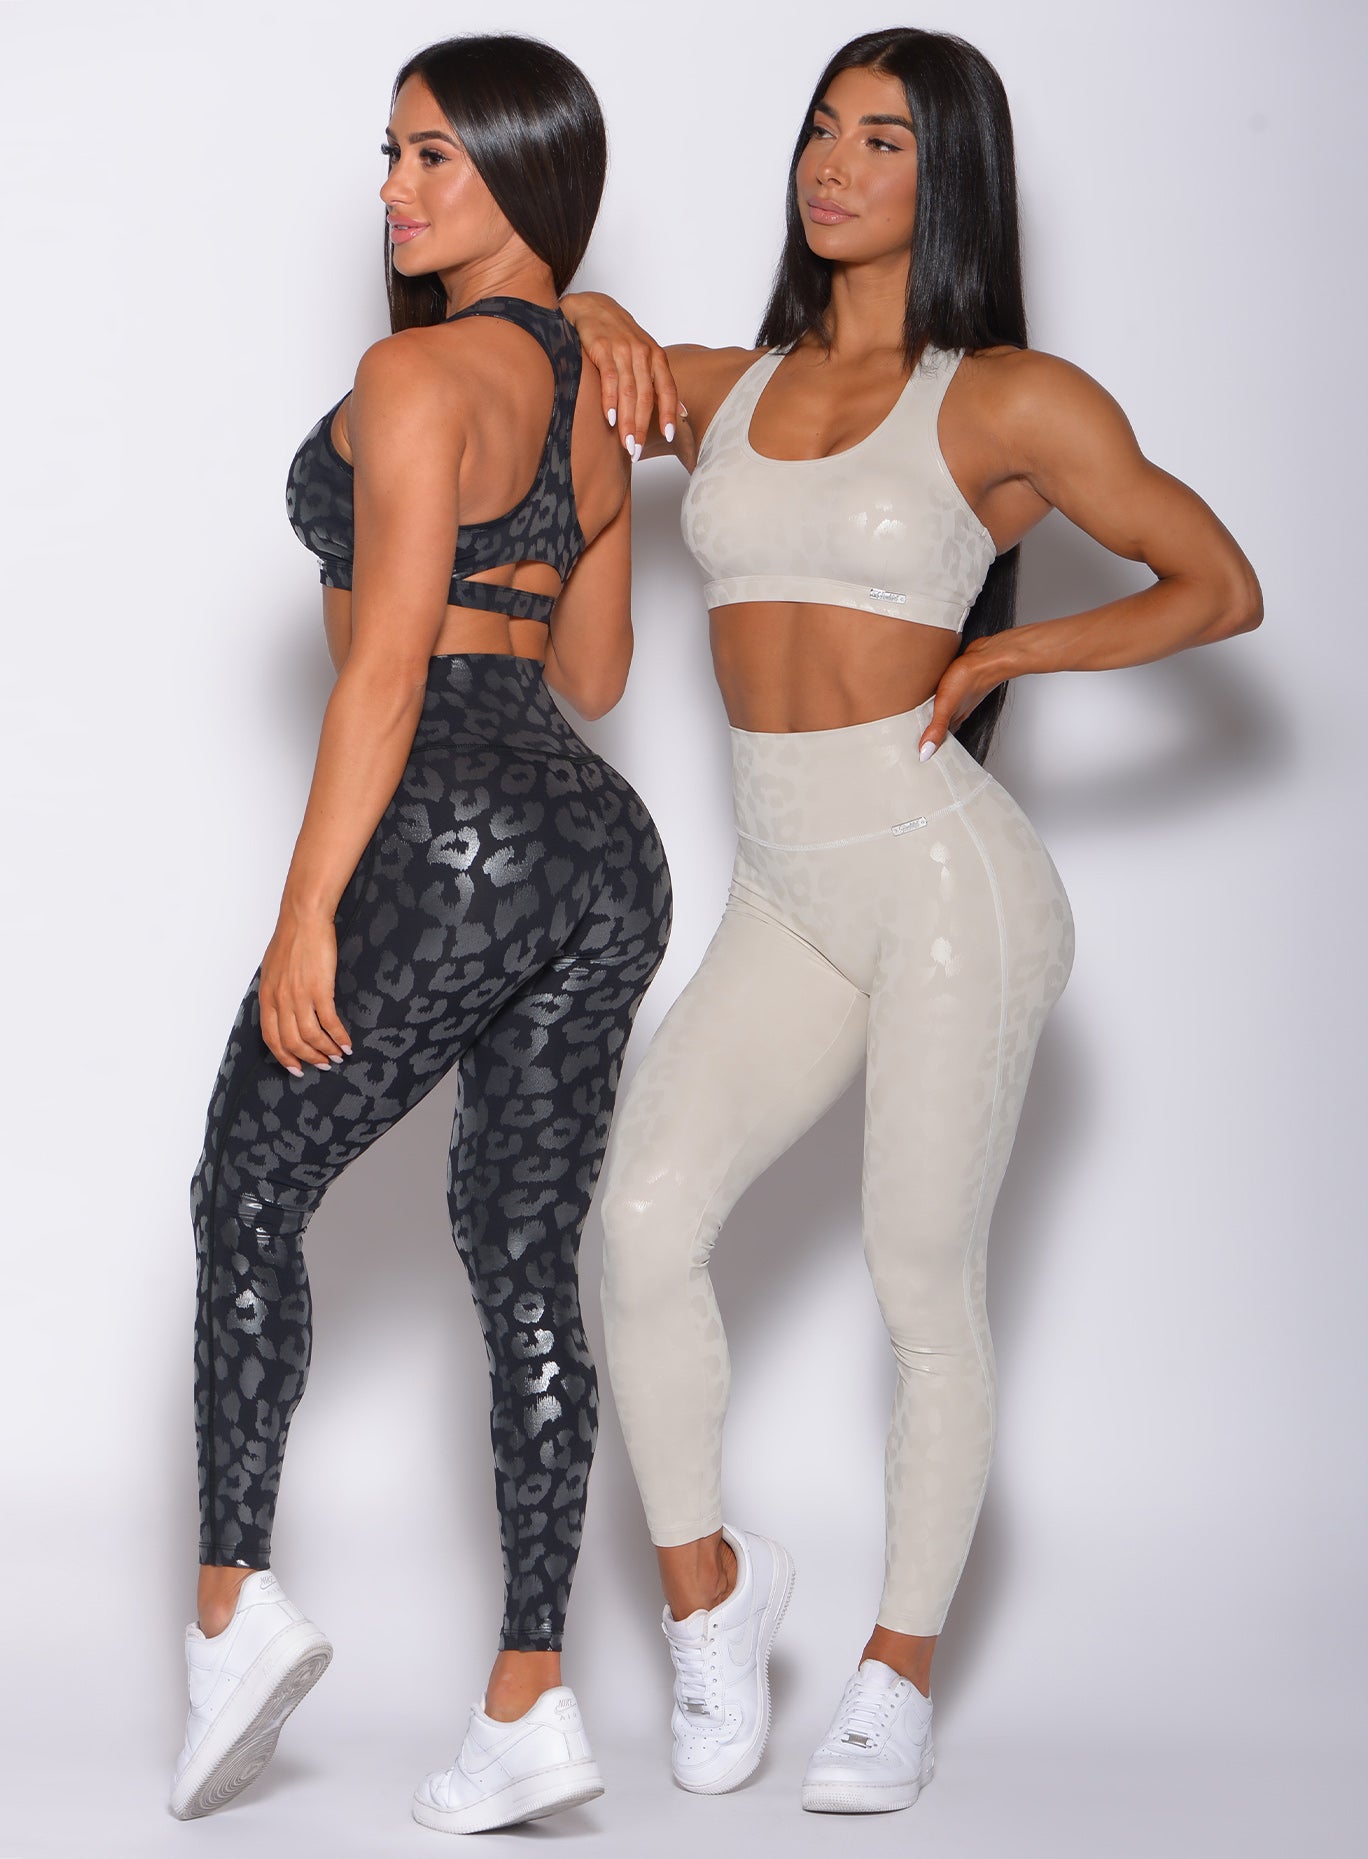 A picture of two models standing side by side wearing our shine leopard leggings sets in black and bluff leopard color 